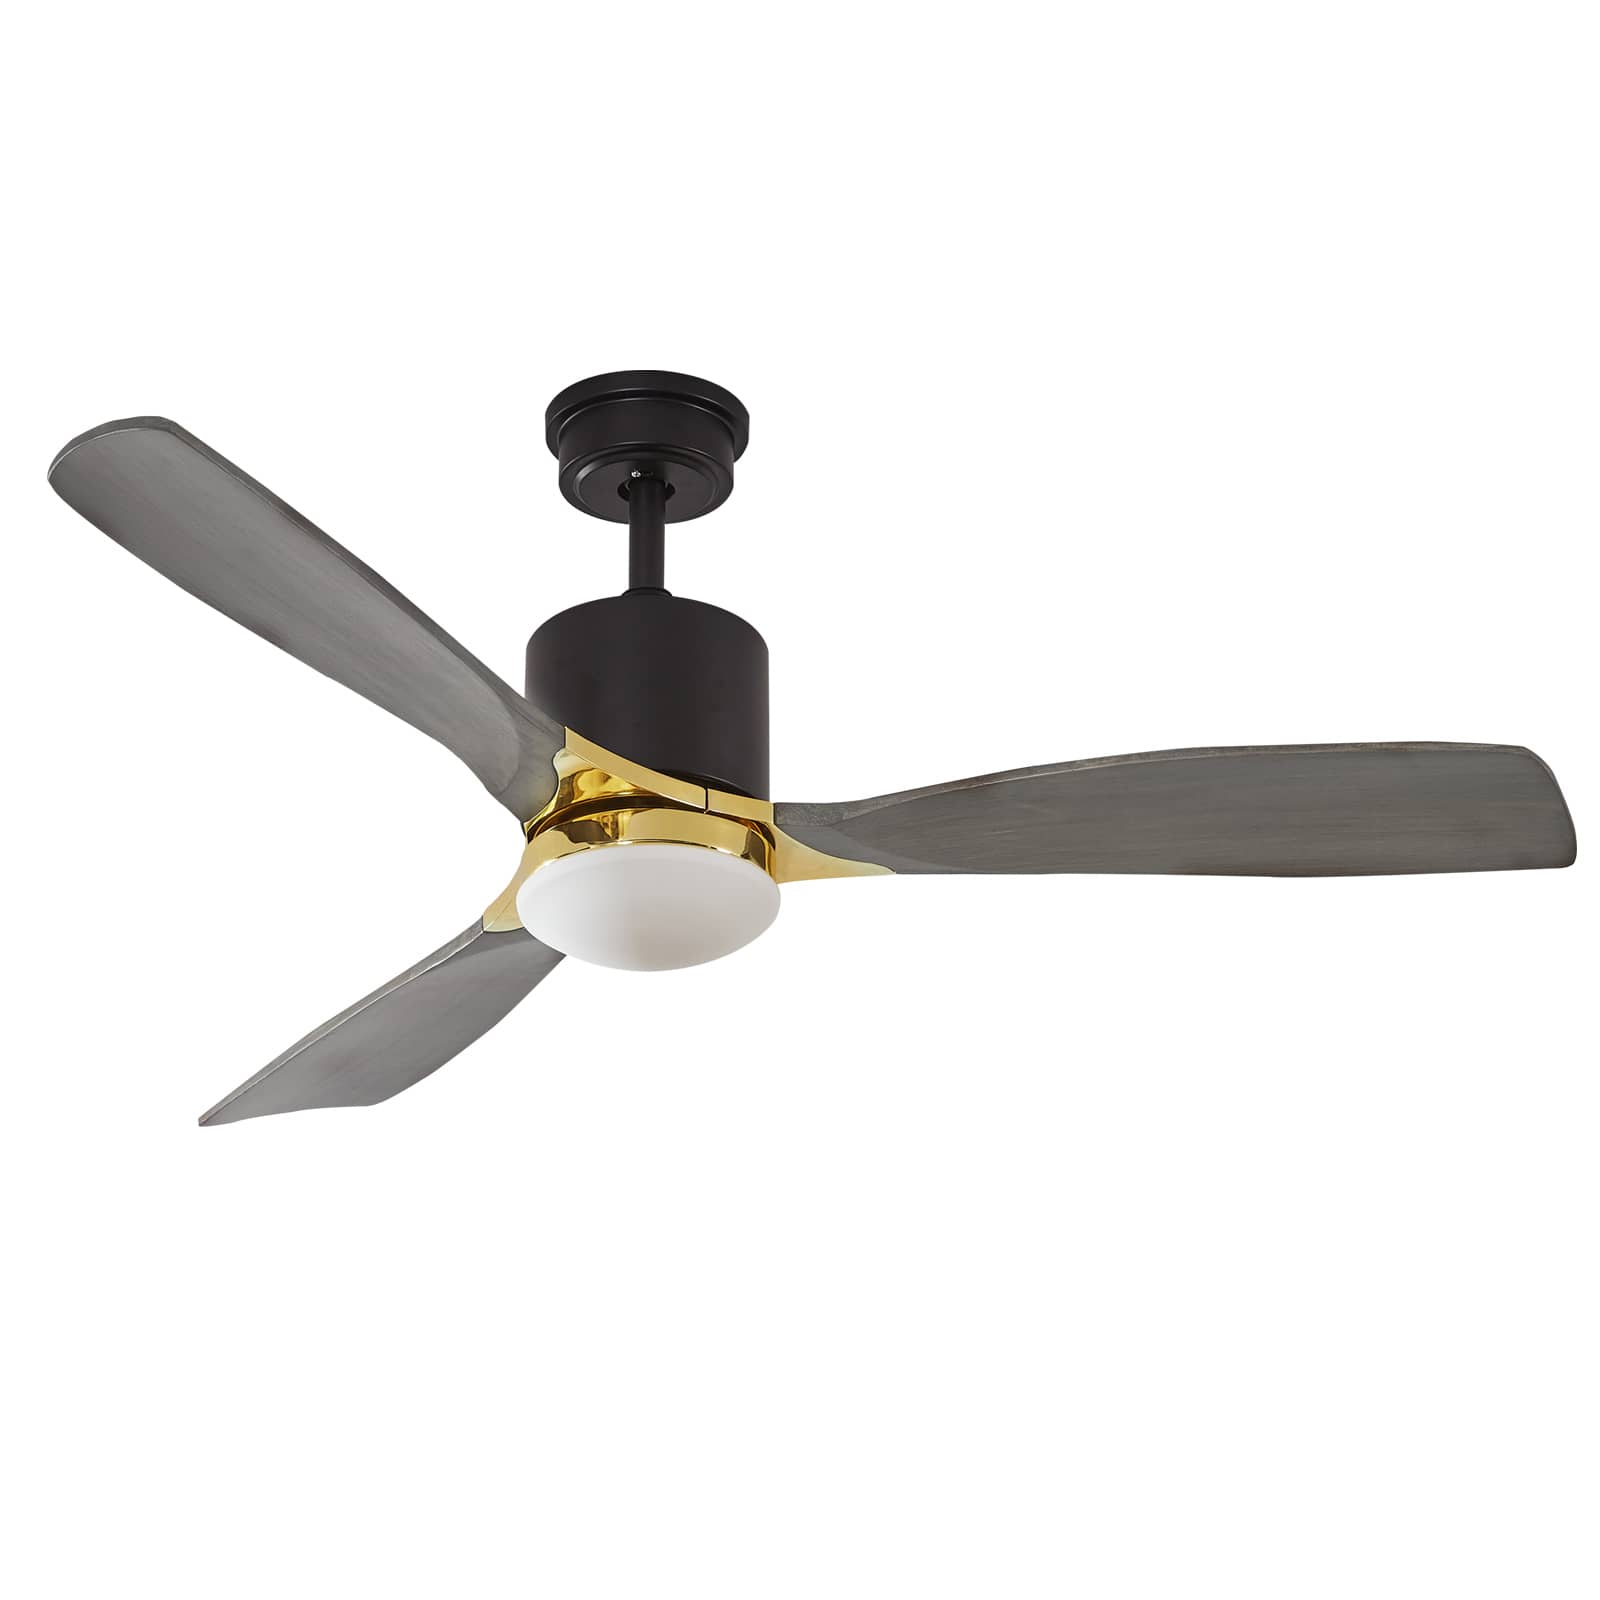 CASAINC 52 in. Ceiling Fan with Light and Remote Control